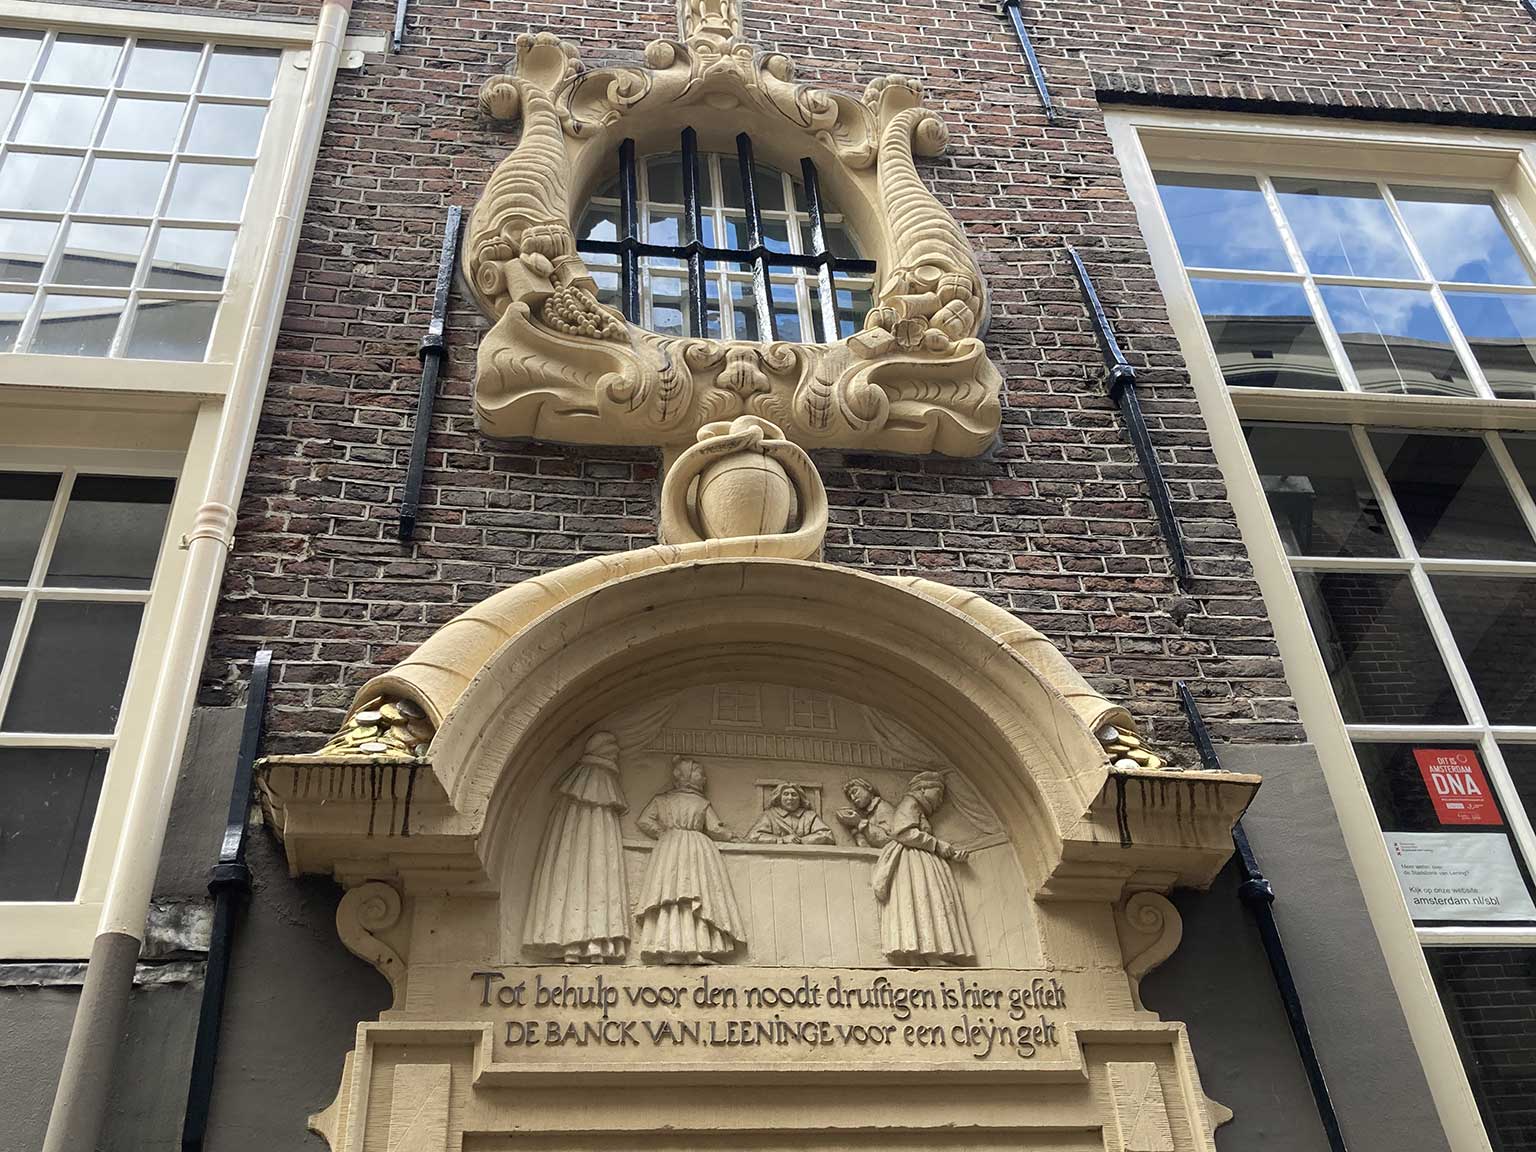 Side entrance of the City Pawn Bank on Enge Lombardsteeg, Amsterdam